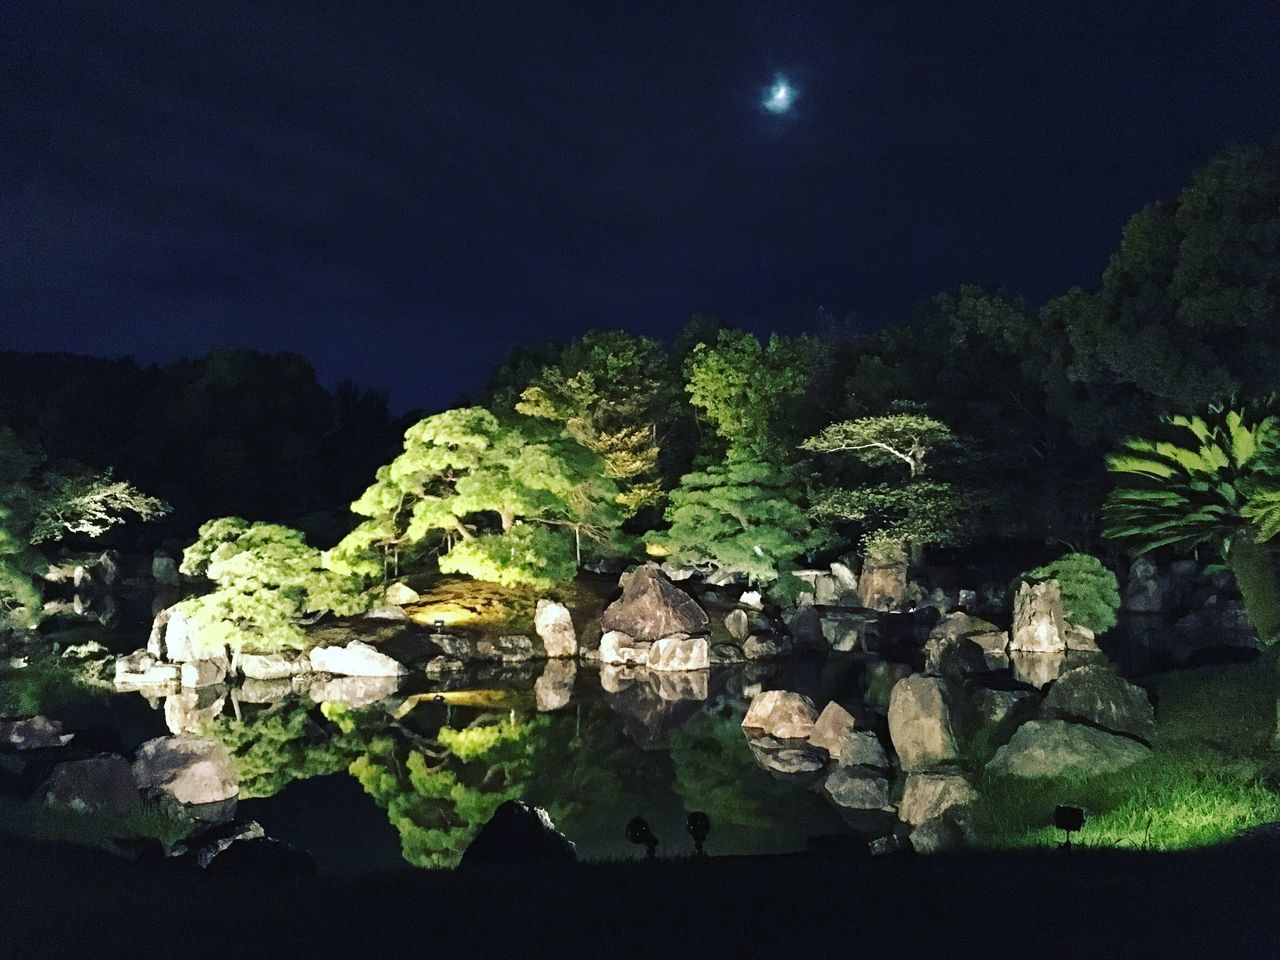 night, illuminated, scenics, tranquility, tranquil scene, beauty in nature, dark, non-urban scene, sky, nature, tourism, rock formation, no people, majestic, fragility, ancient, history